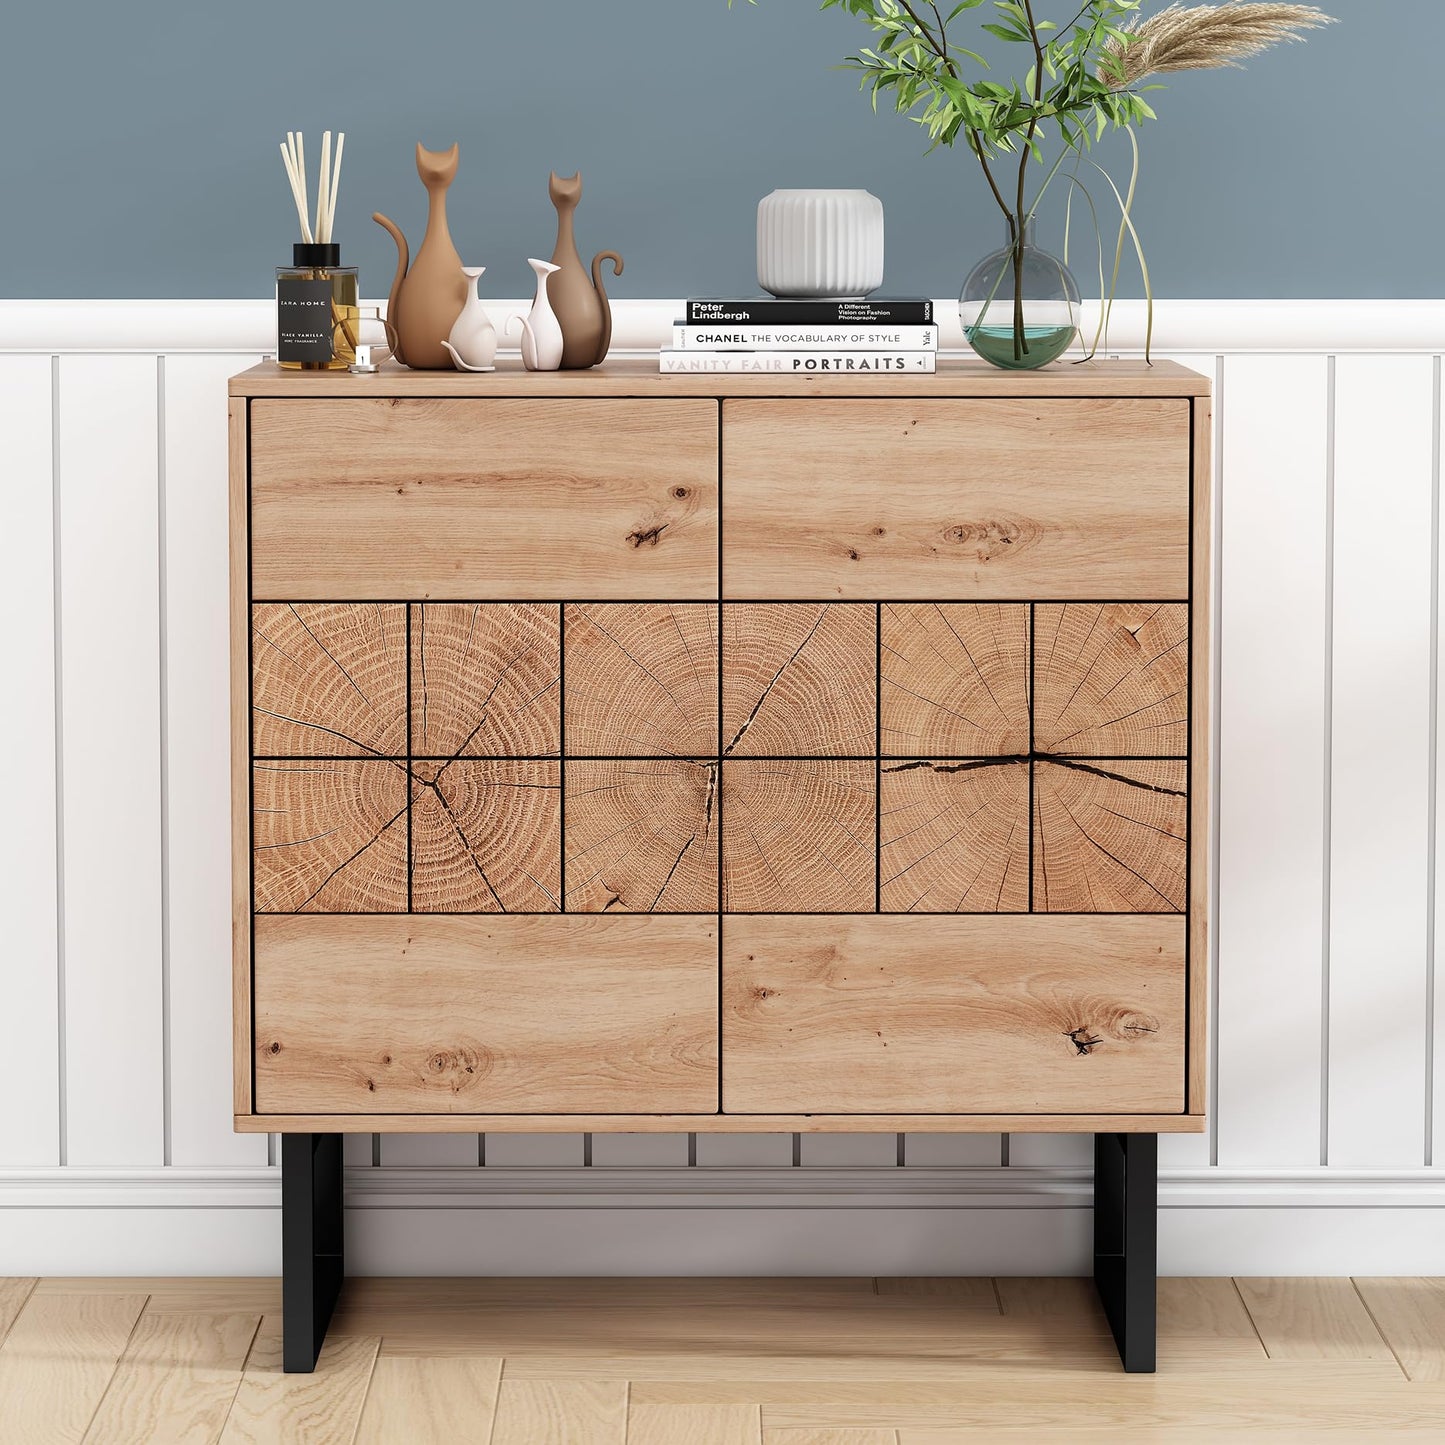 O&K FURNITURE Farmhouse Sideboard Cabinet, Storage Cabinet with Doors and Adjustable Shelves, Wood Buffet Cabinet with Storage for Kitchen, Living